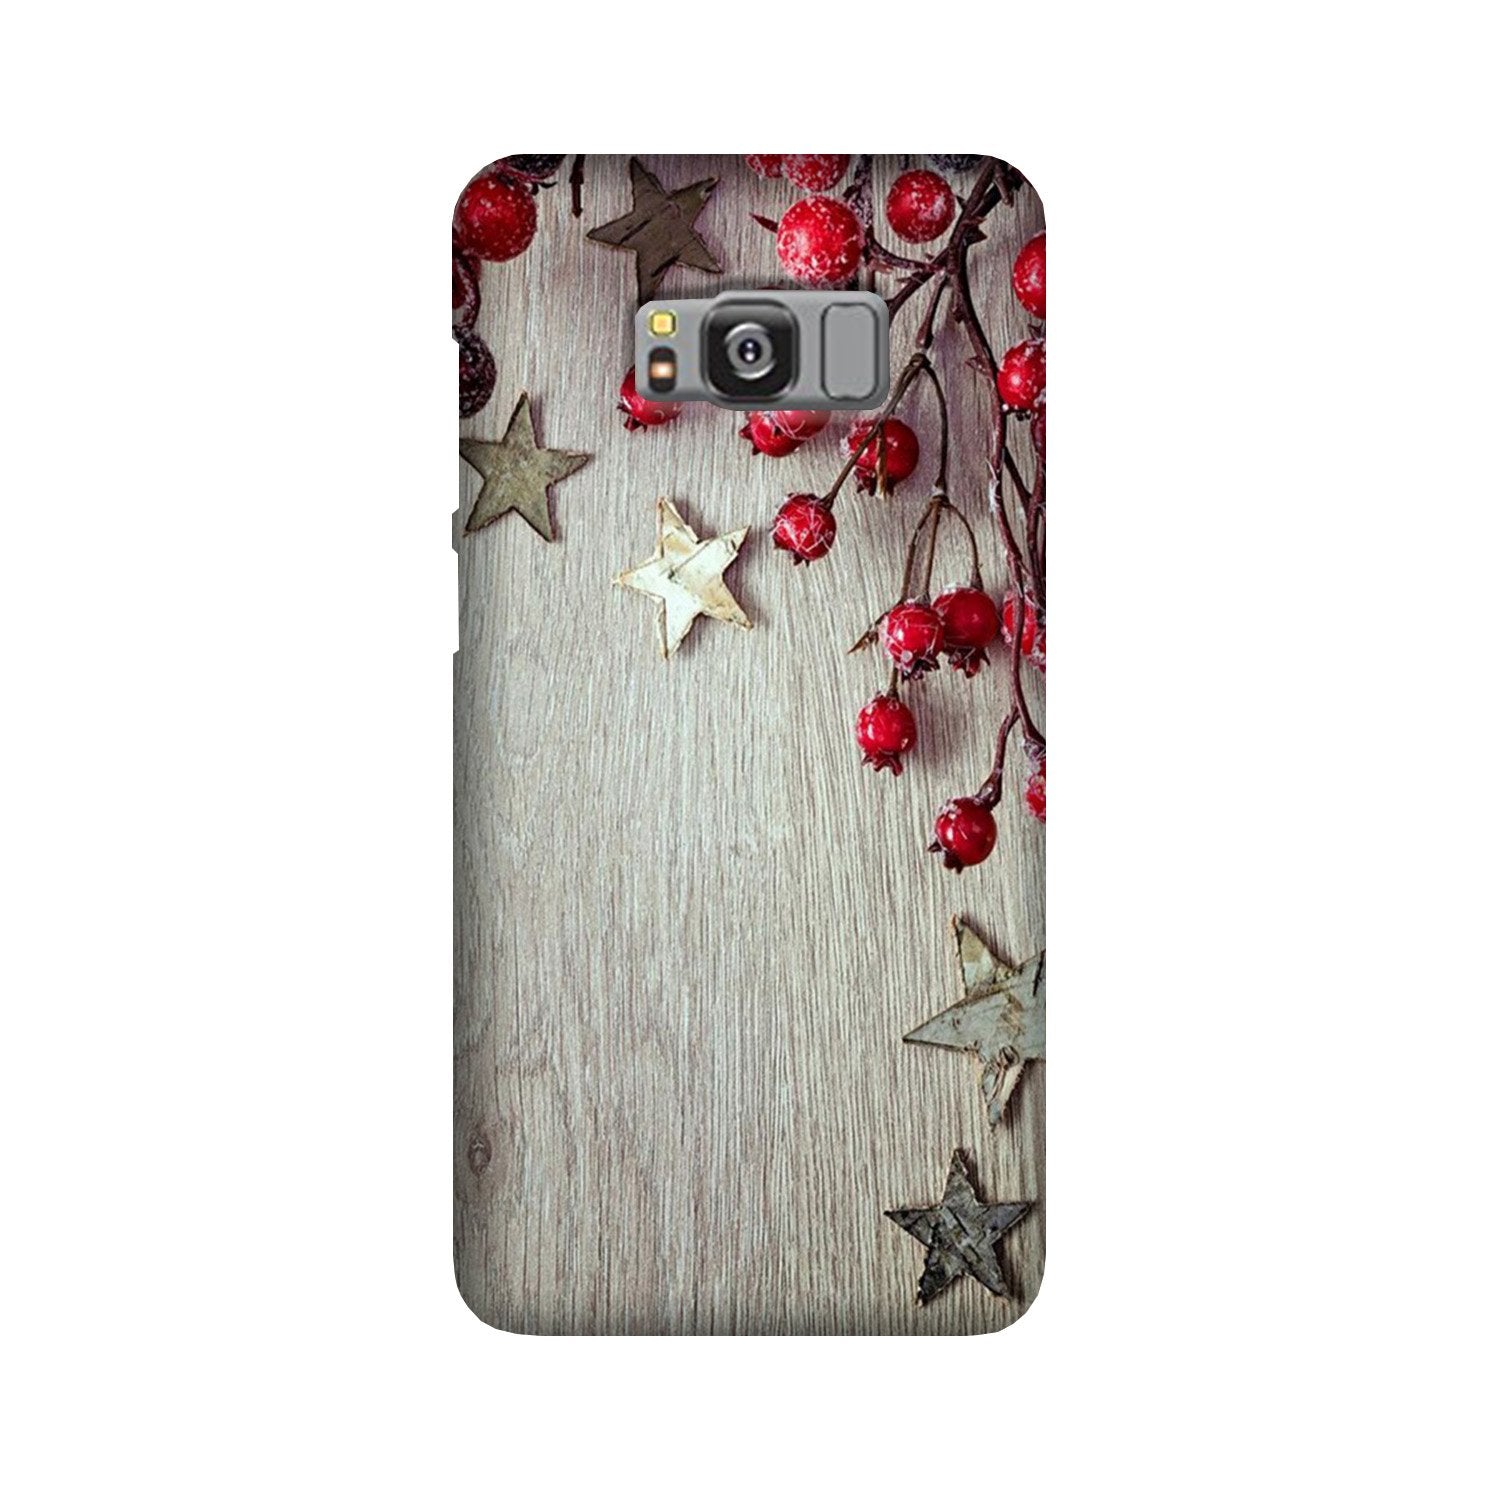 Stars Case for Galaxy S8